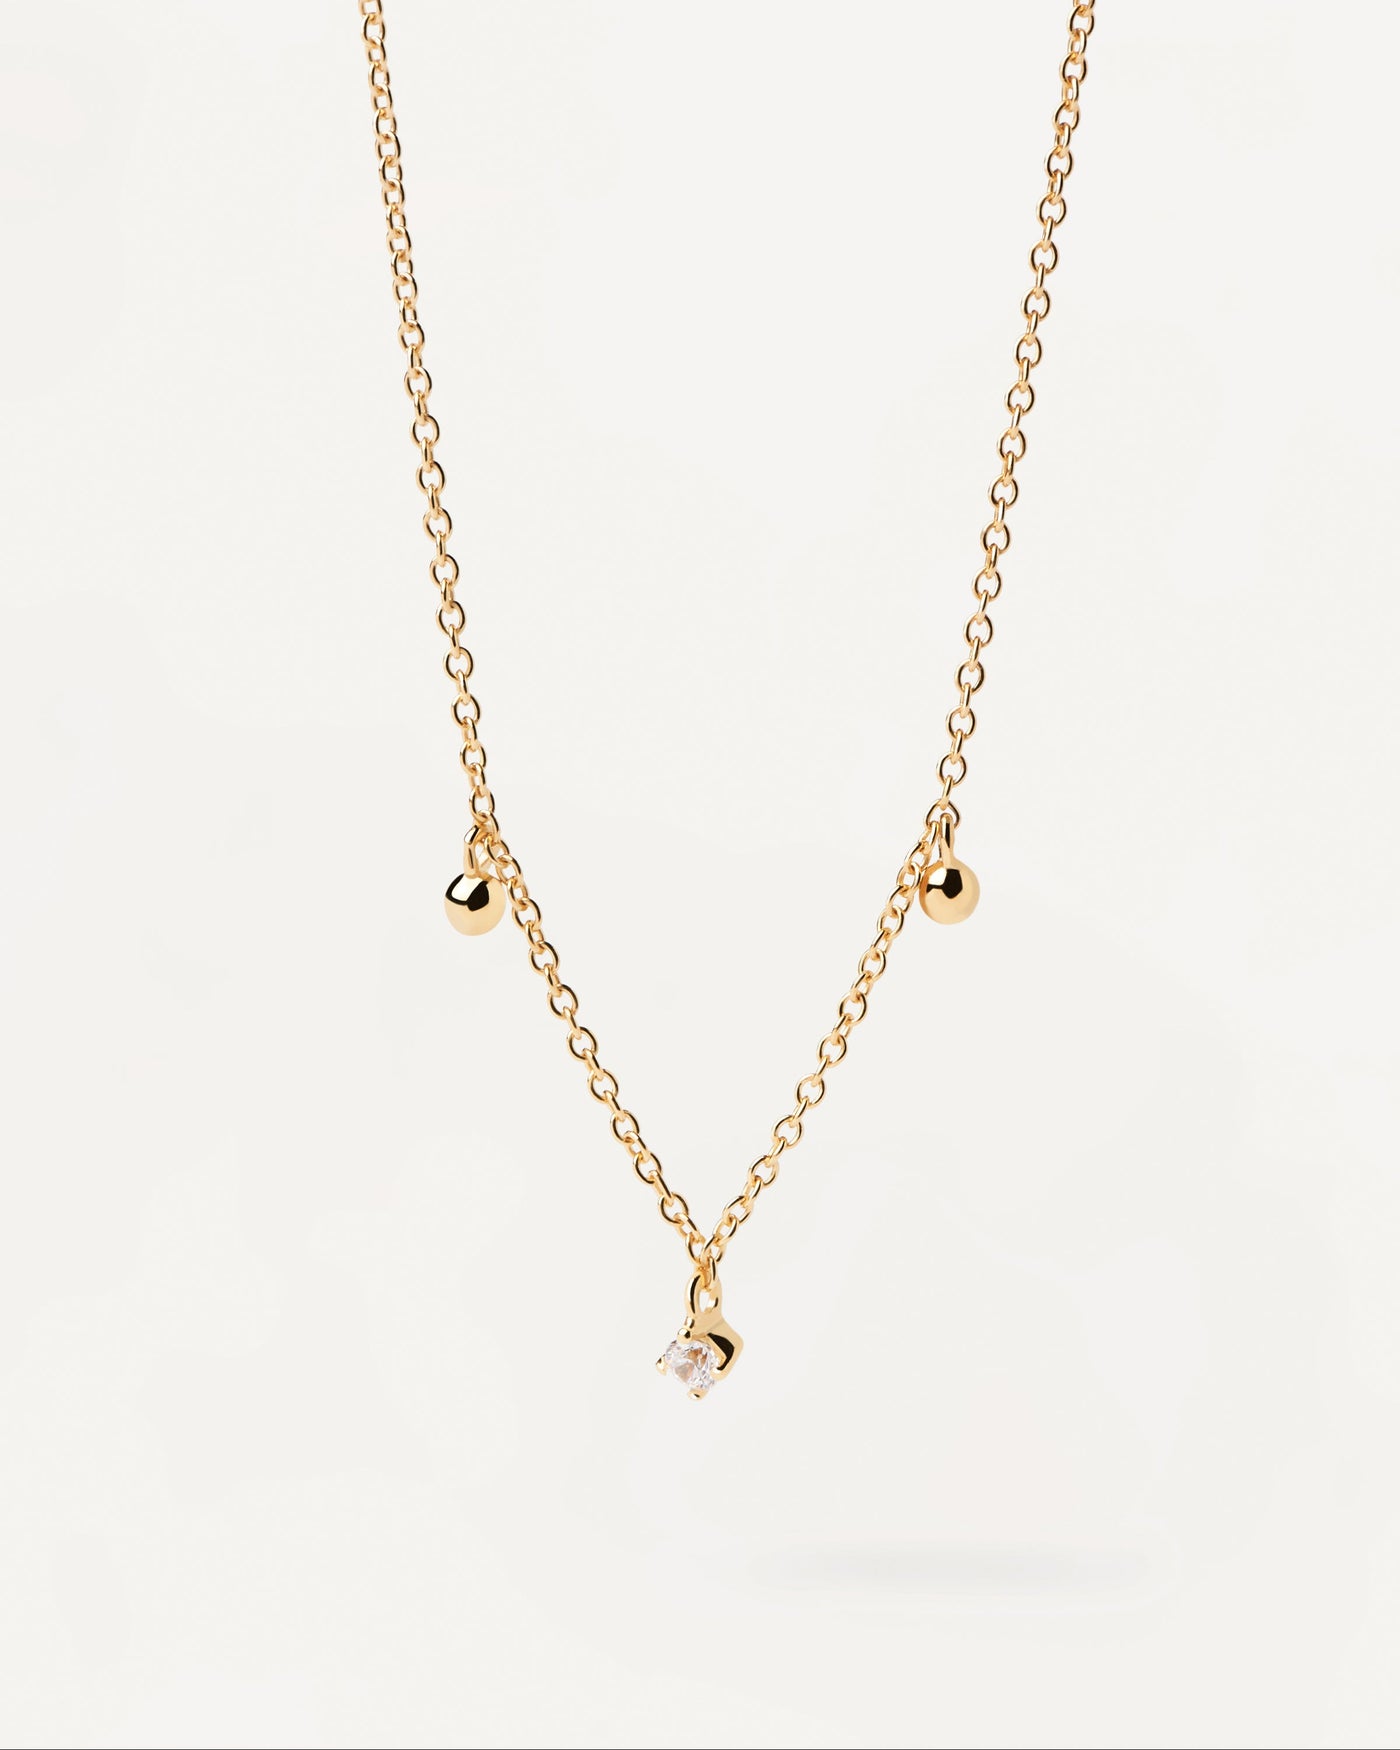 2023 Selection | Love Triangle Necklace. Gold-plated chain necklace with dainty balls and white zirconia. Get the latest arrival from PDPAOLA. Place your order safely and get this Best Seller. Free Shipping.